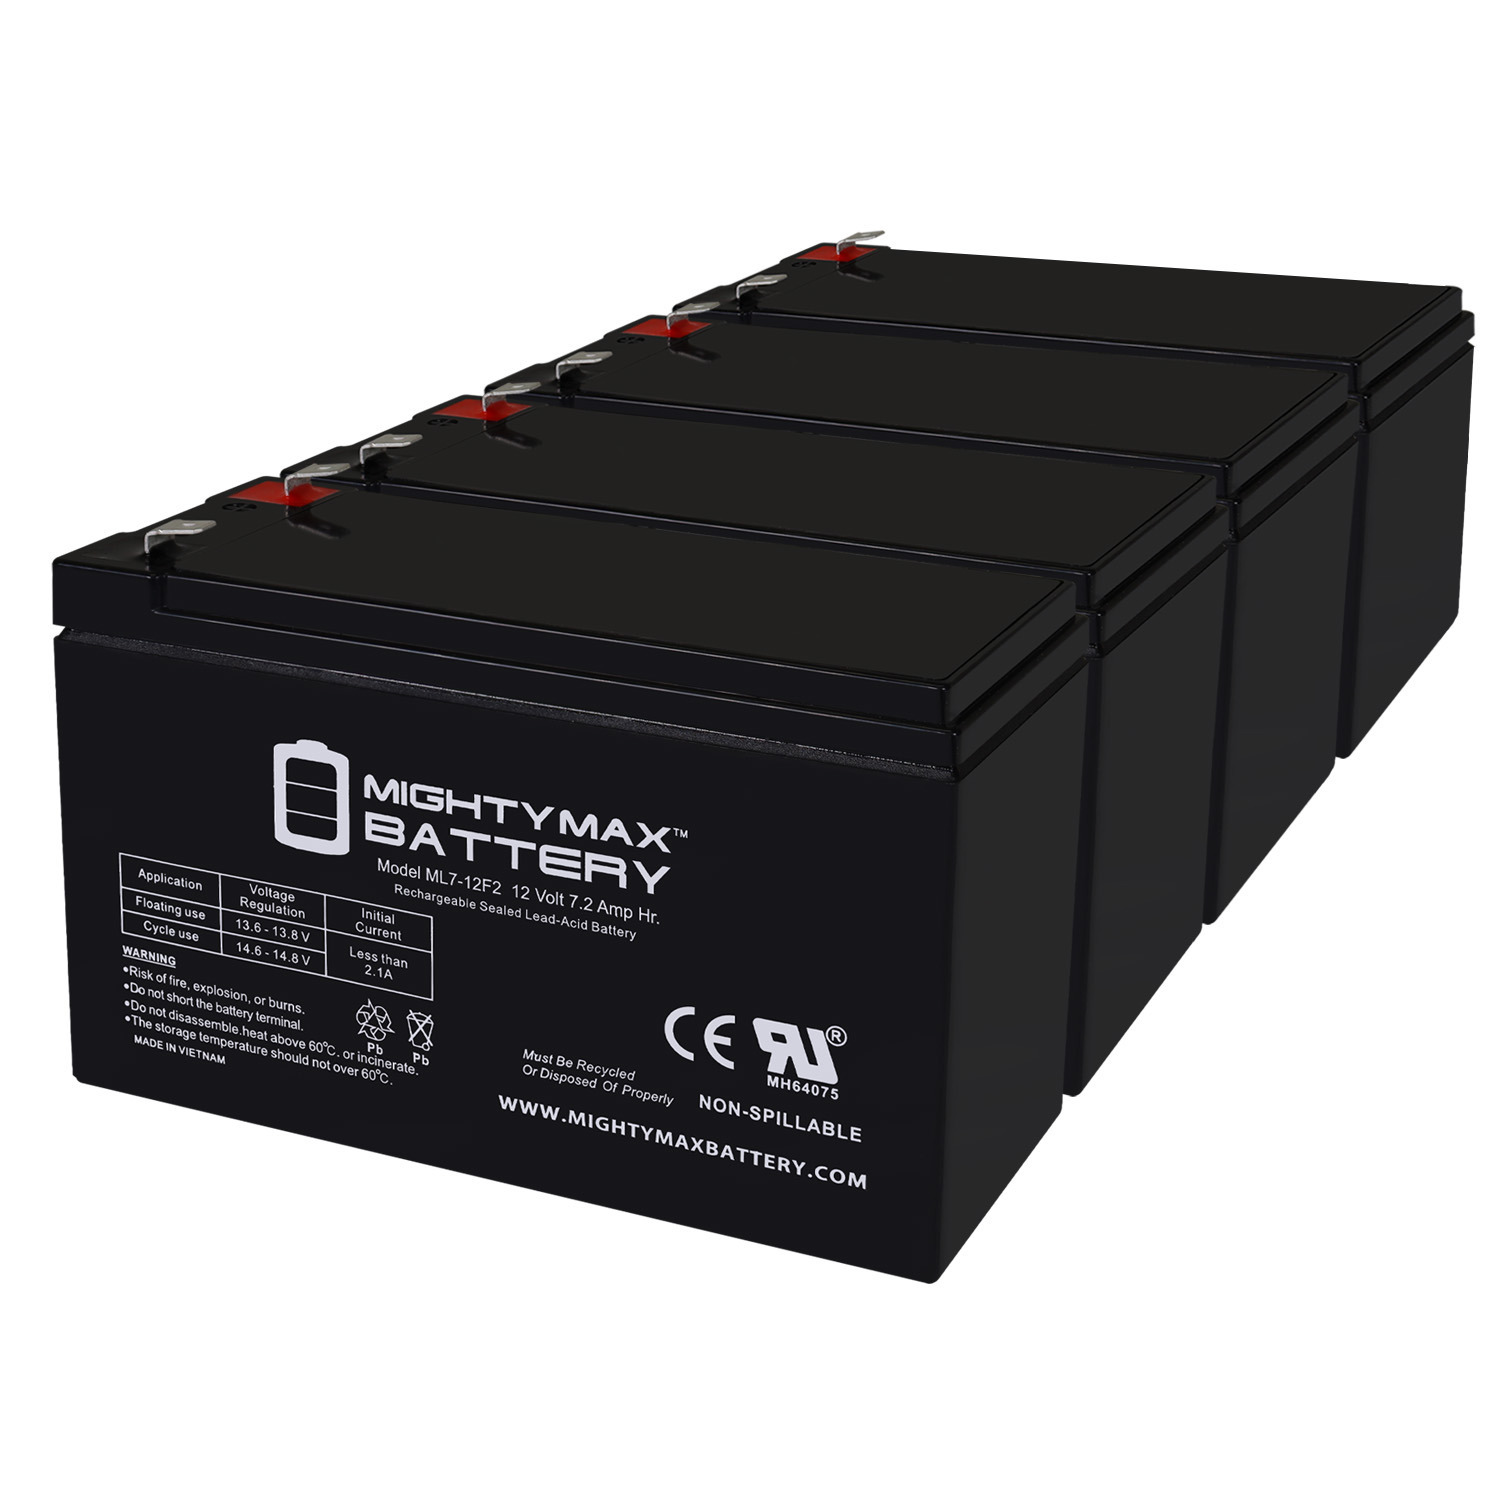 12V 7Ah F2 Replacement Battery for Minuteman CPR3BP3 - 4 Pack